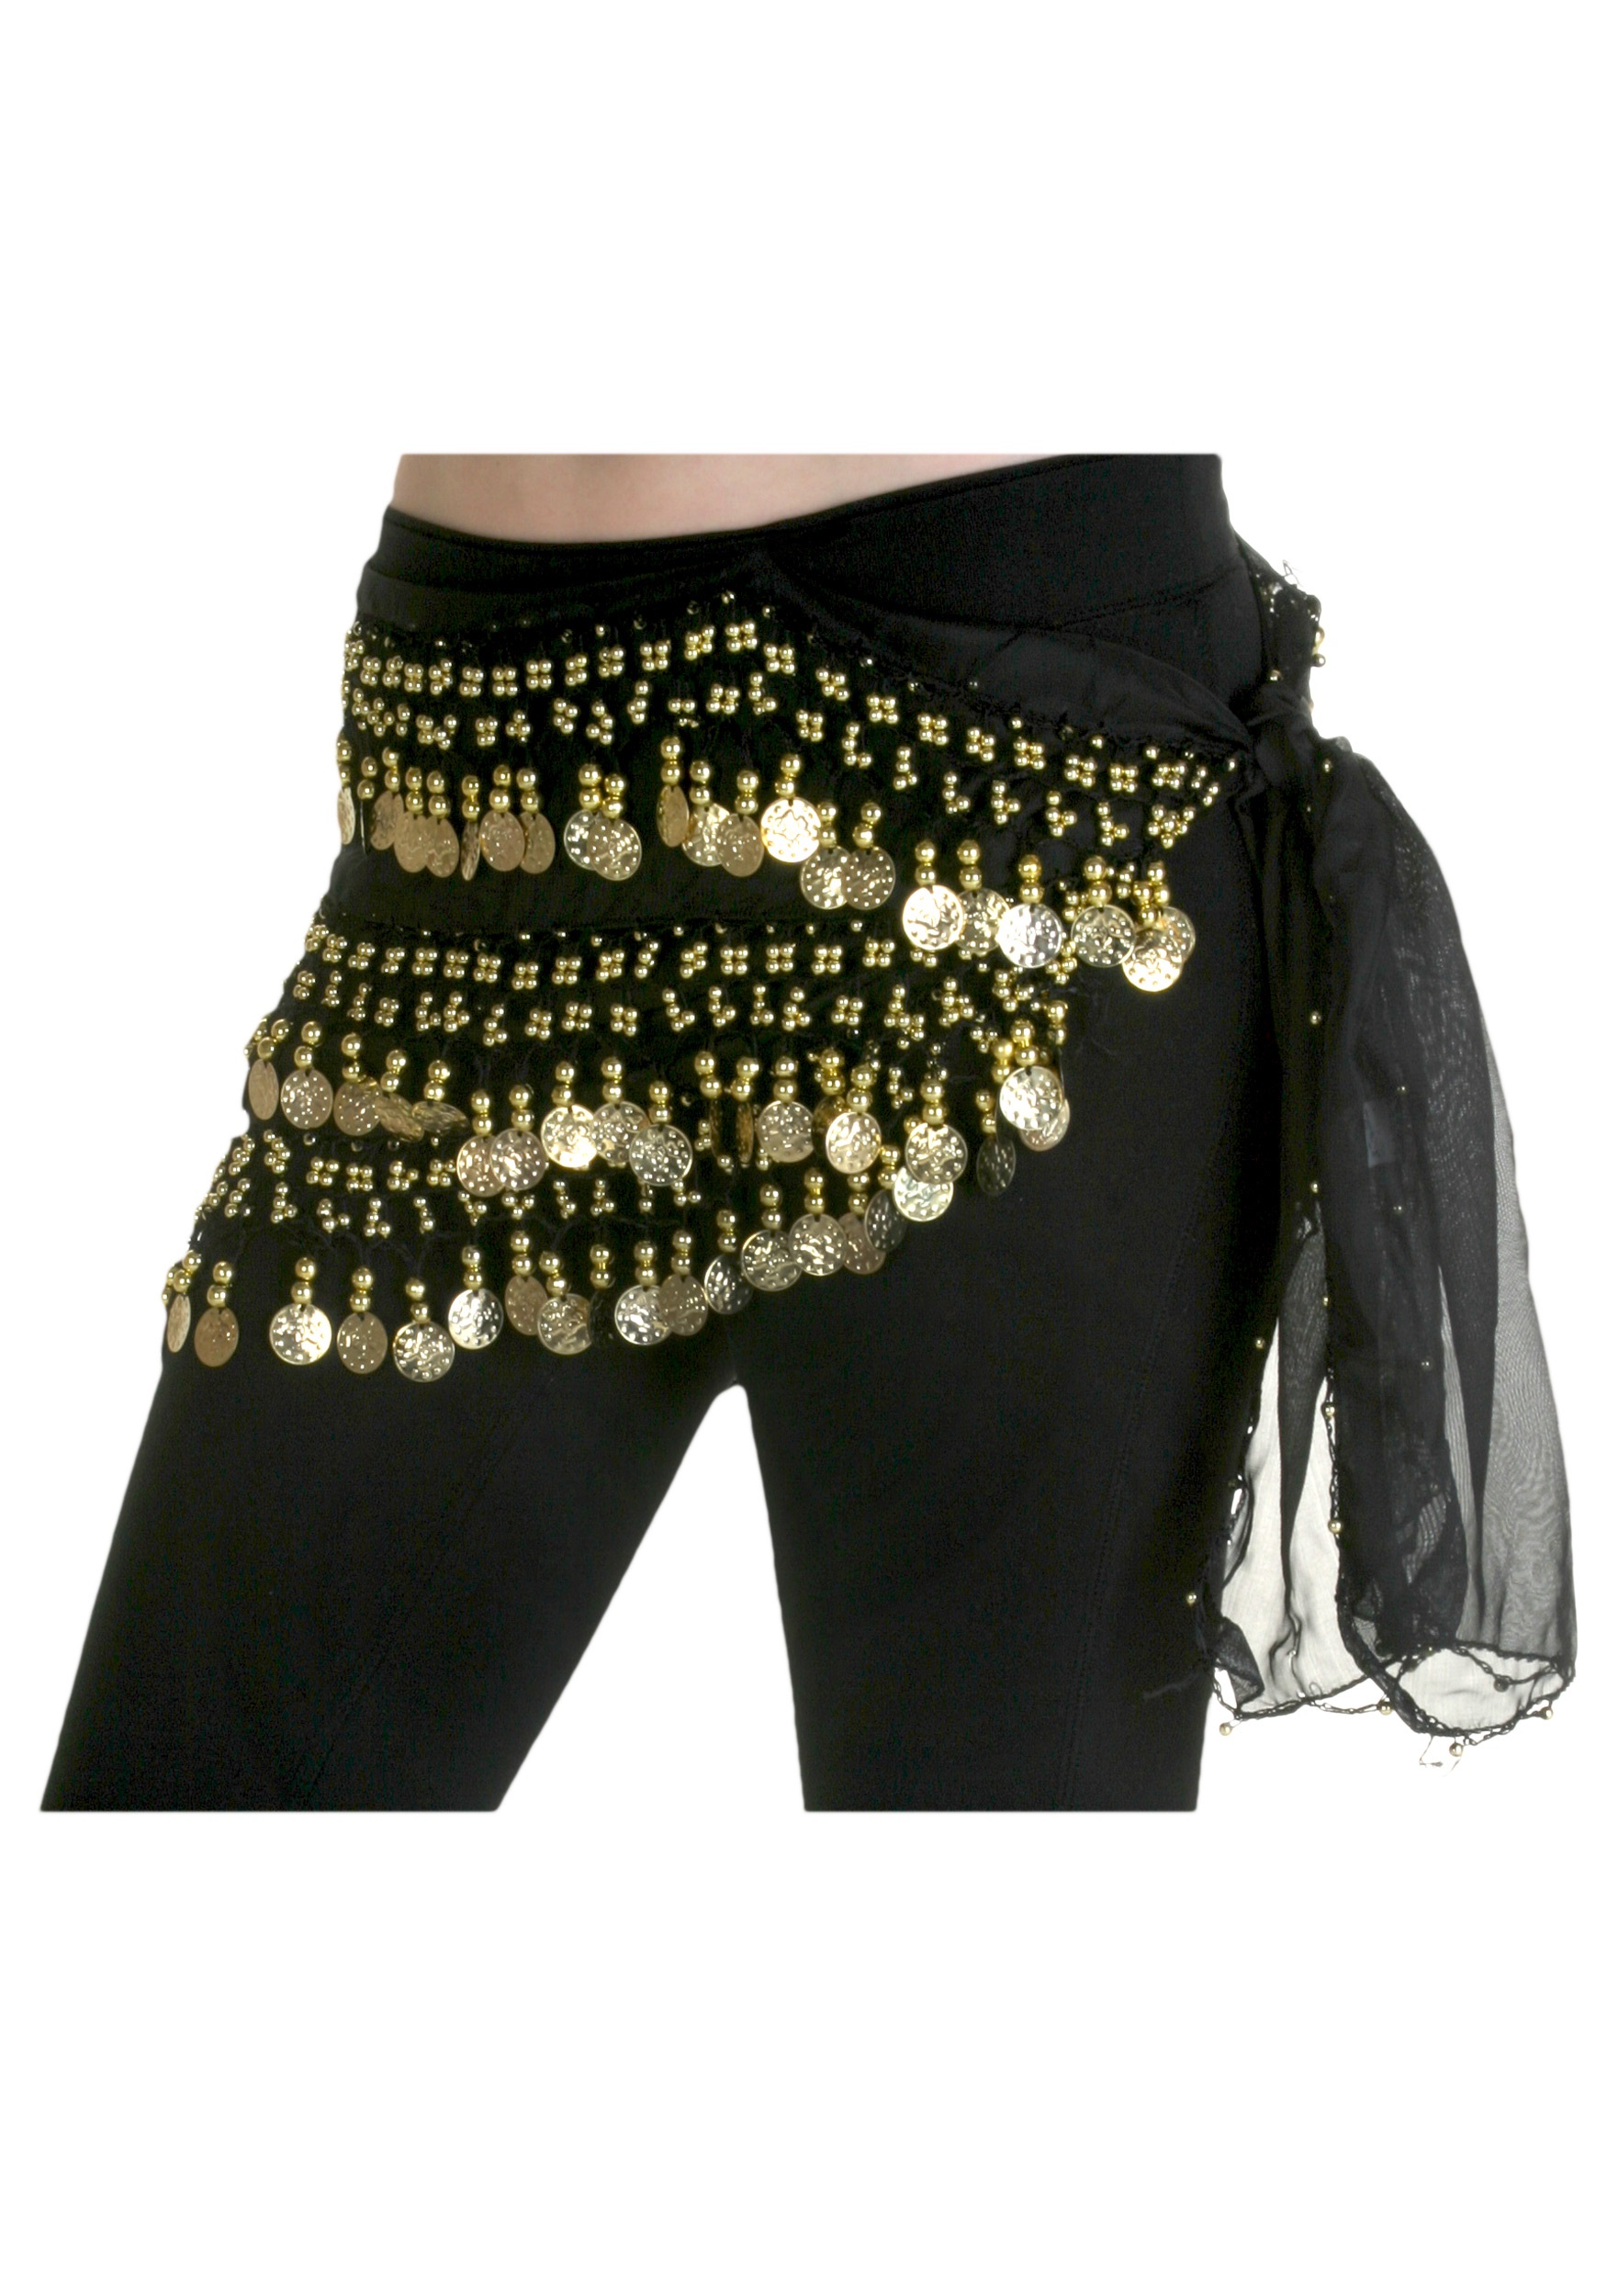 Black Chiffon Belly Dancing Hip Scarf | Costume Accessories